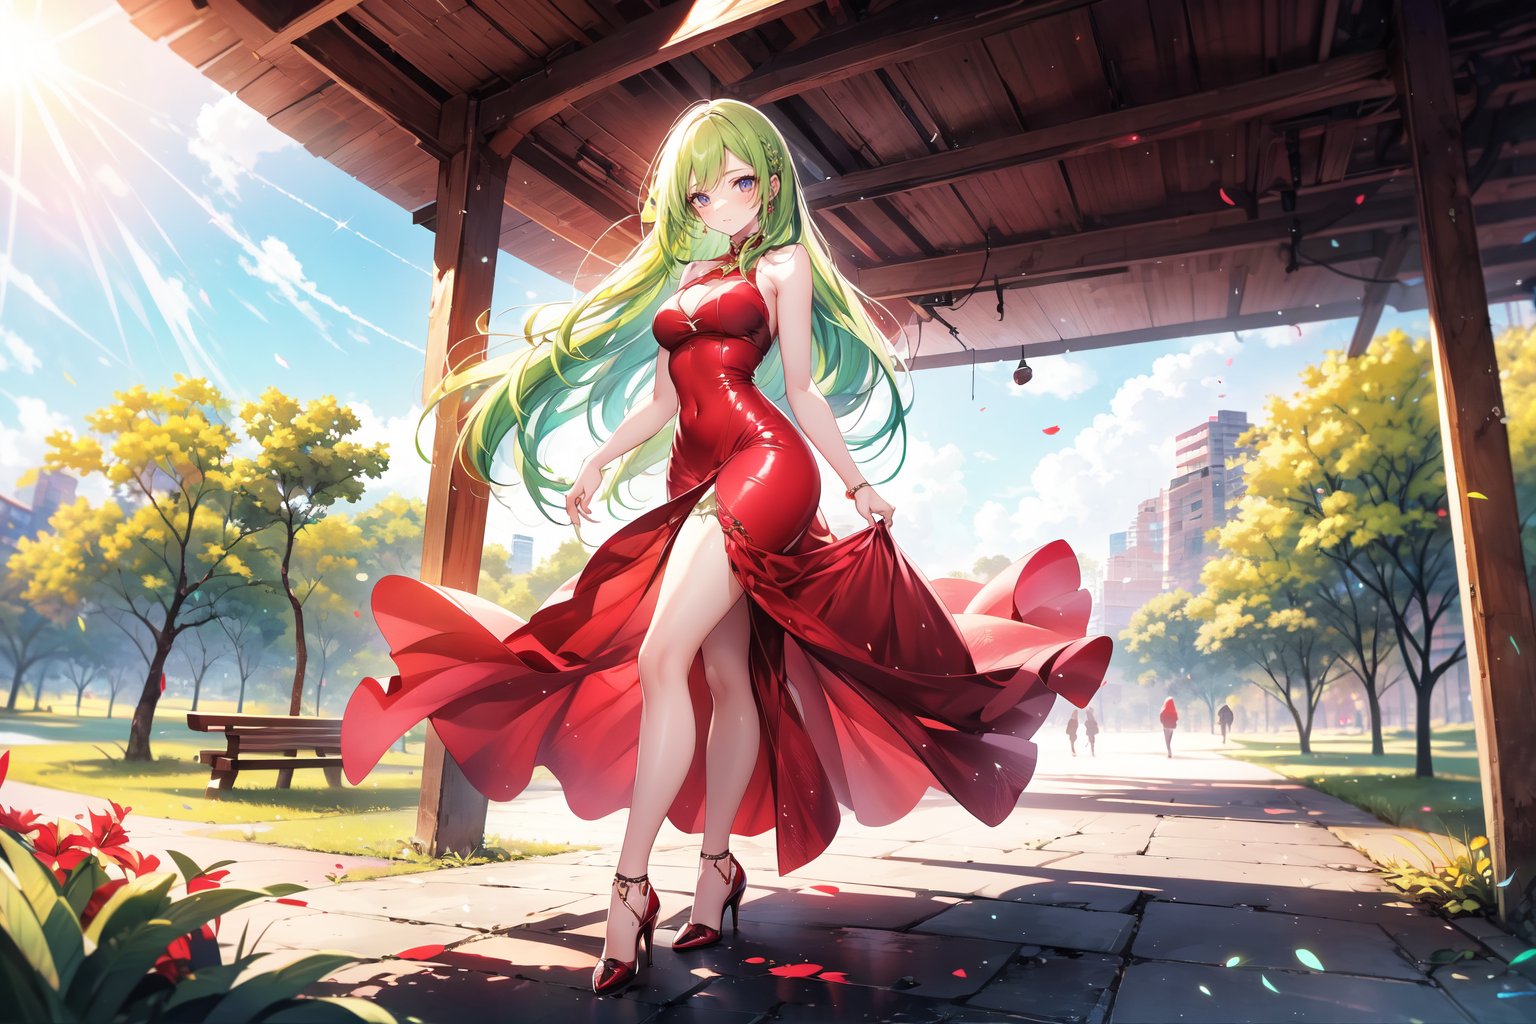 A 17-year-old girl in the park with long green hair, red glasses, long dress, stockings, high heels, smiling,